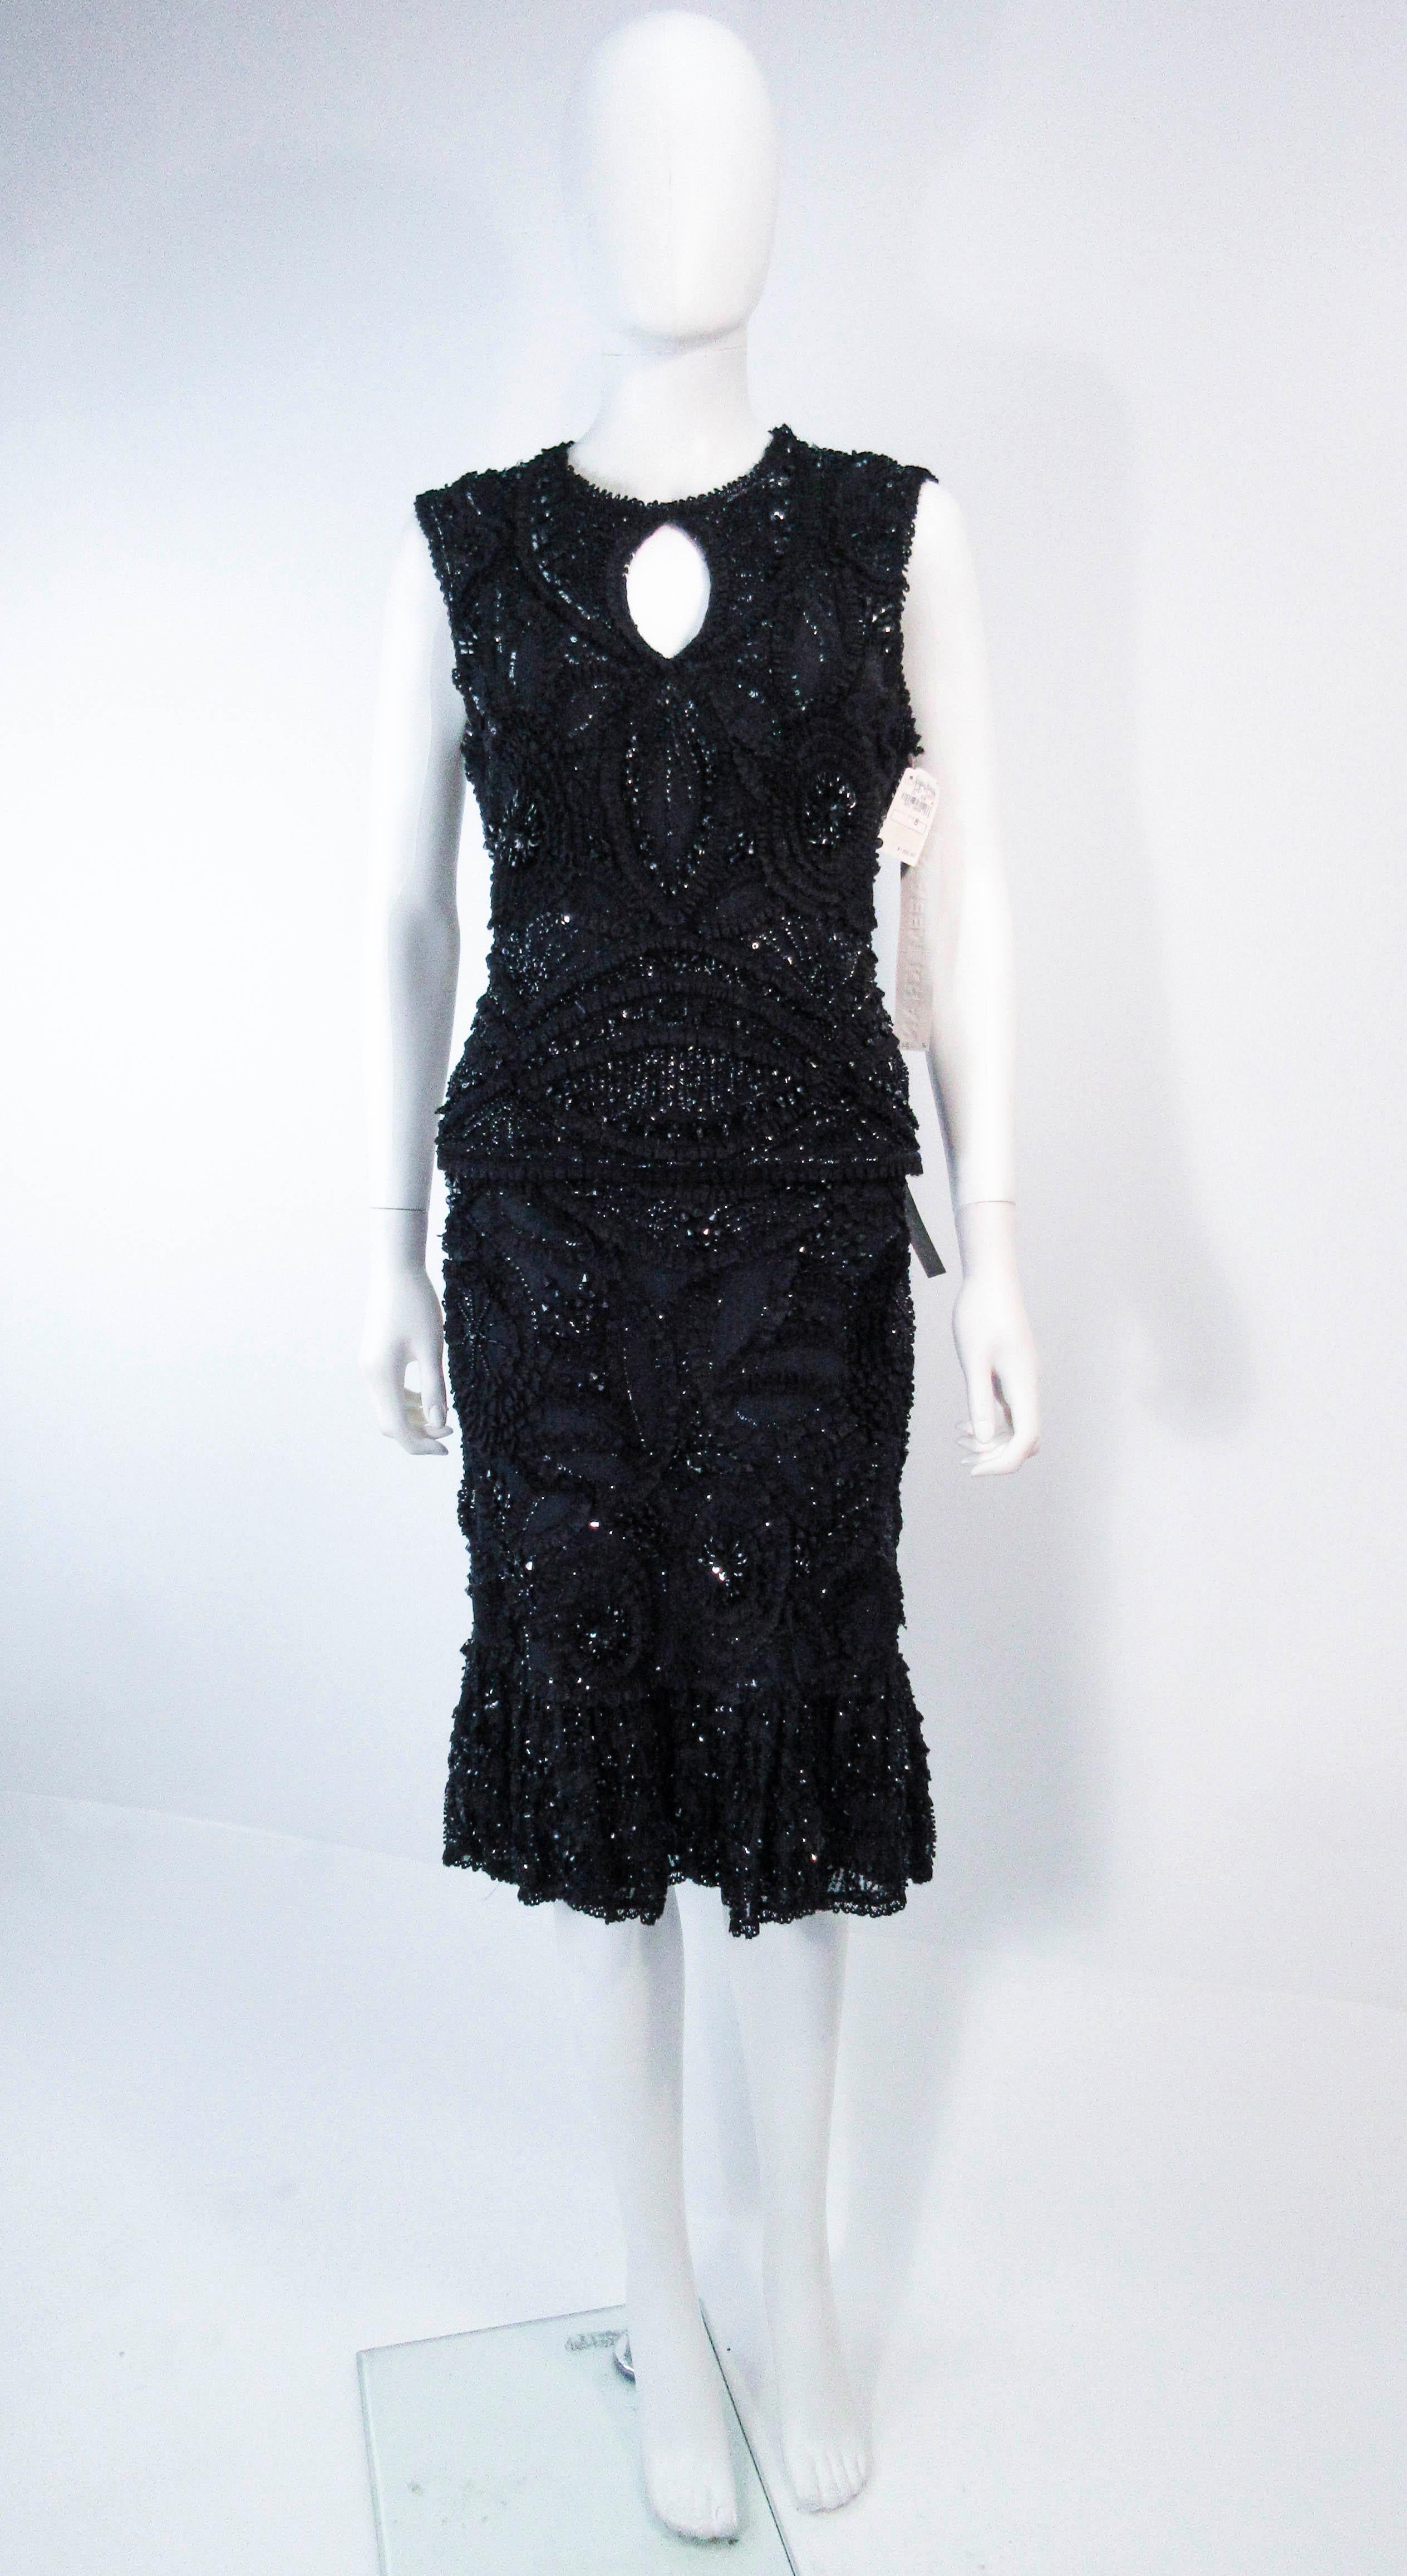 This Naeem Khan set is composed of a black stretch knit with black sequin & bead applique. The blouse features a keyhole design and the skirt has a wonderful flare shape. In excellent 'like new' condition with original price tags. 

**Please